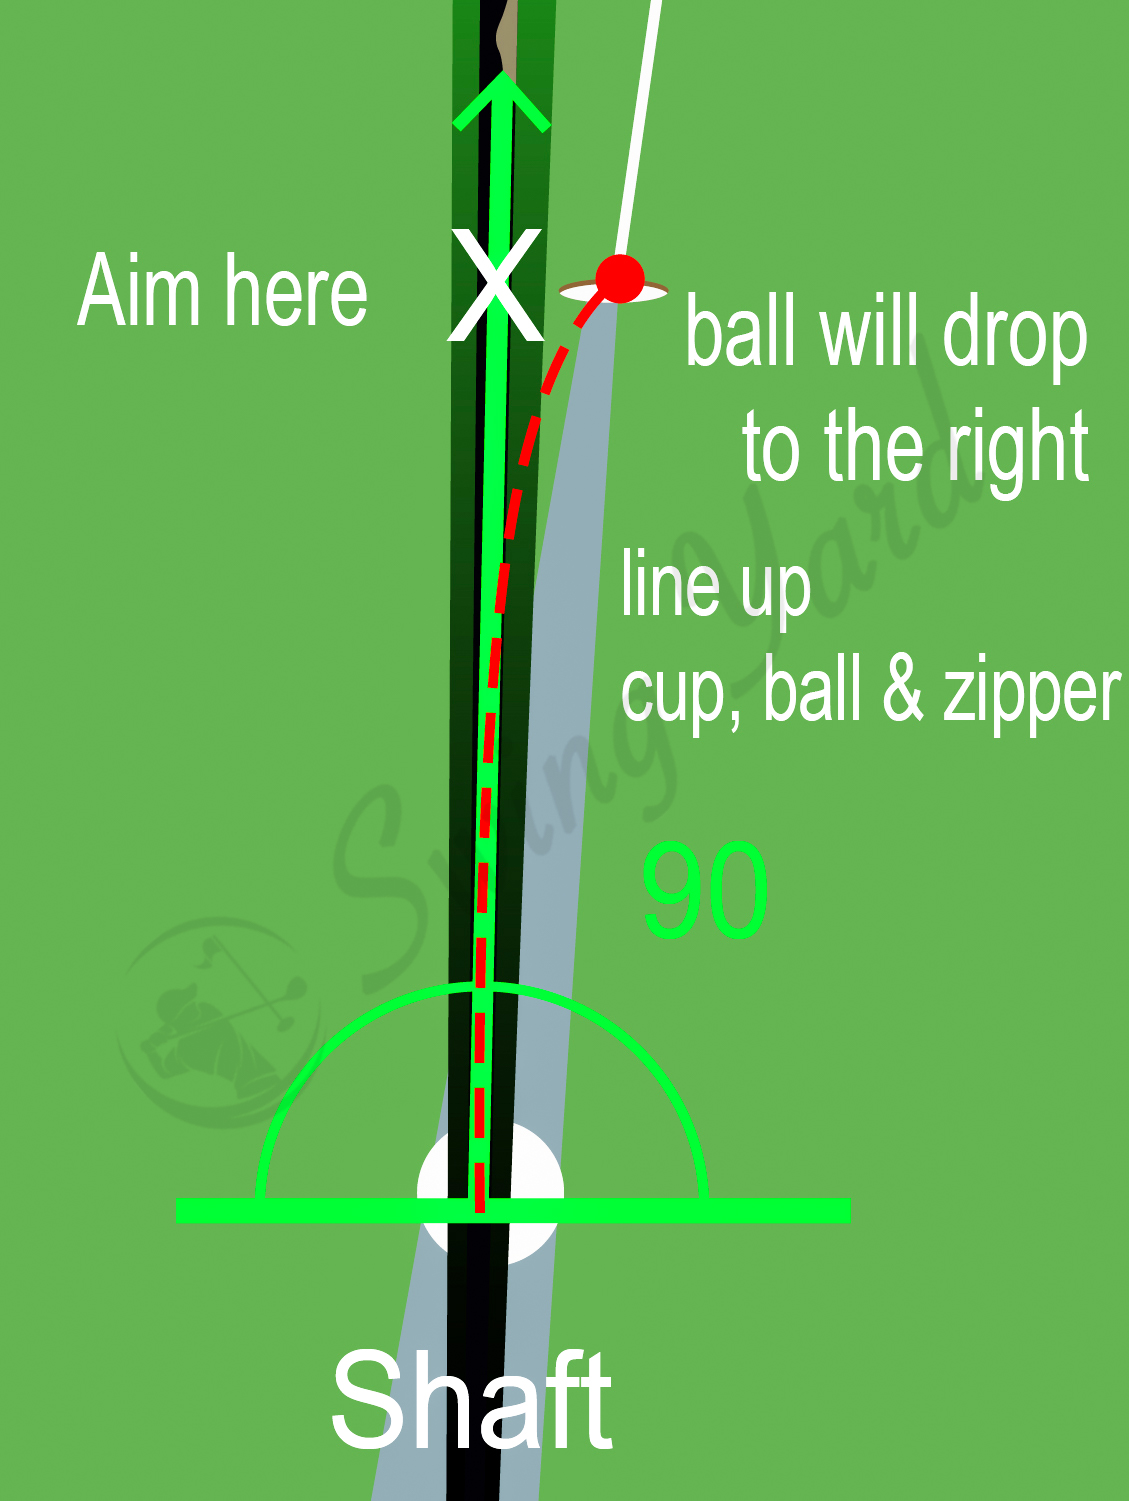 line up cup ball and zipper for plumb bob putts